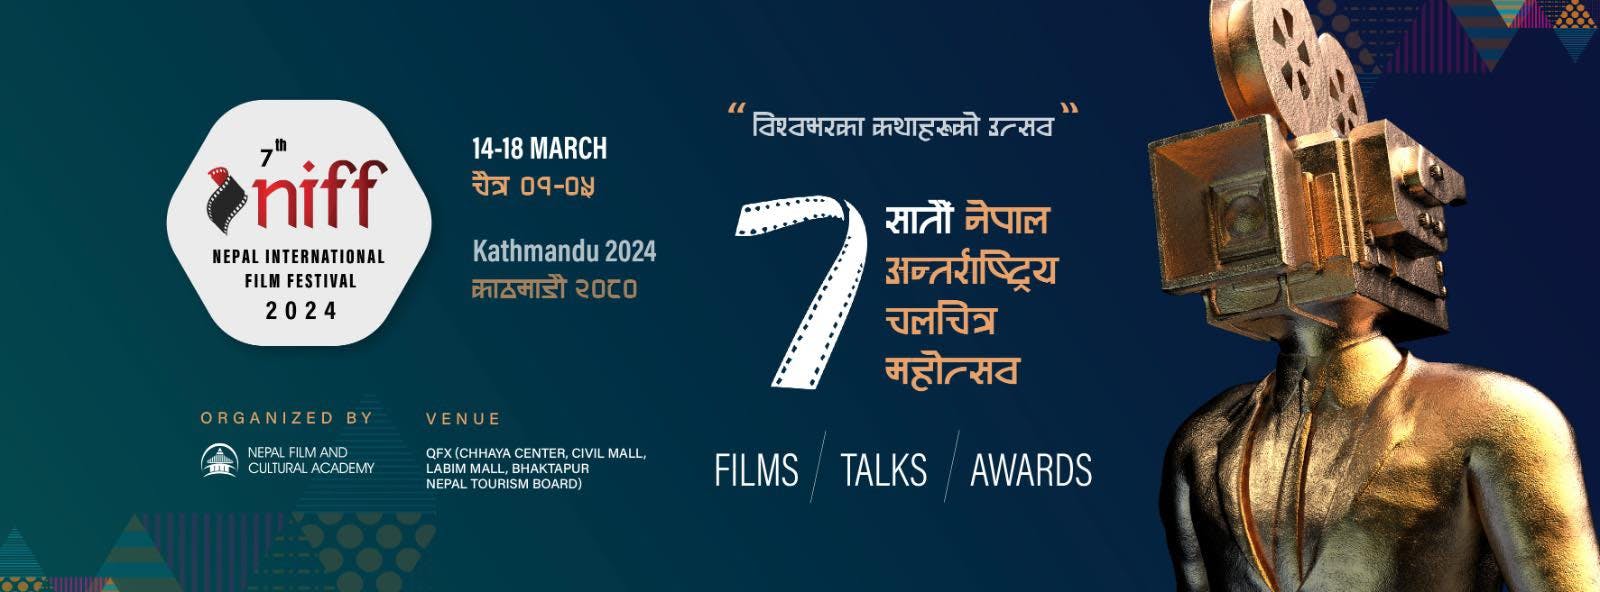 At the Nepal International Film Festival in Chait, 88 films from 40 countrie ...